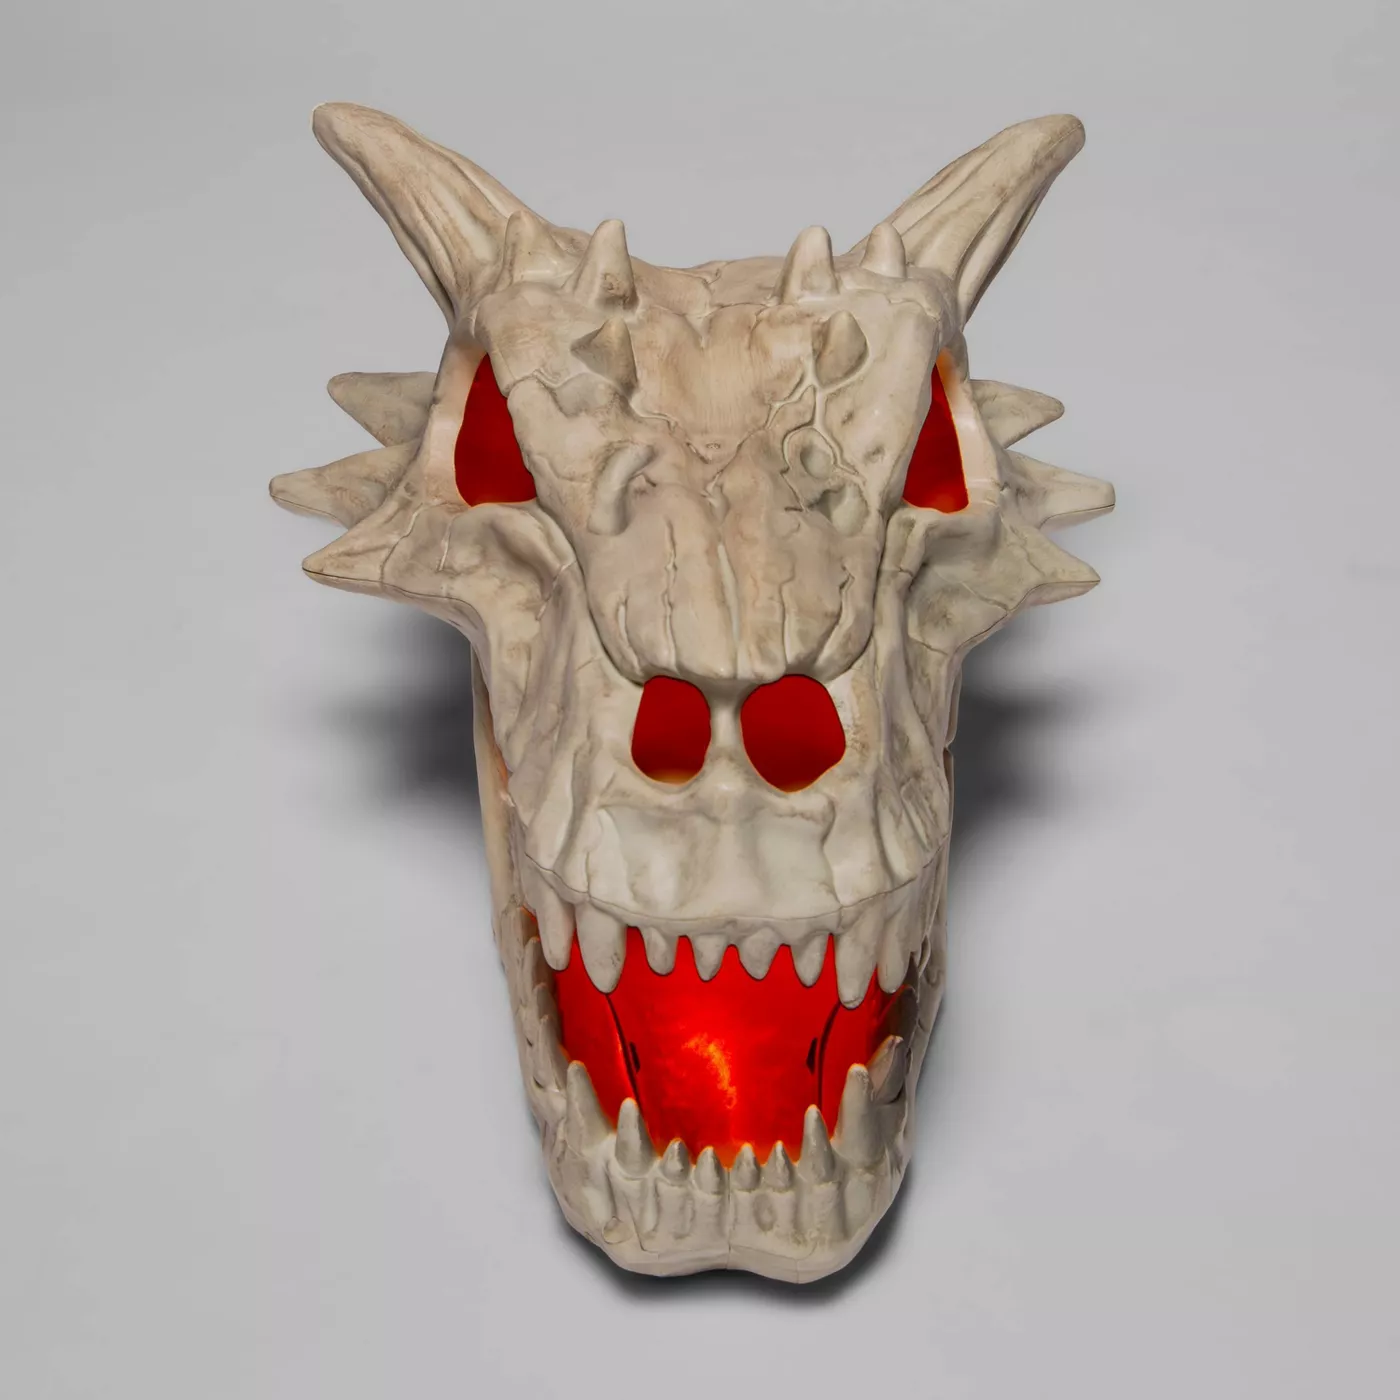 Color Changing Light Up Dragon Skull Halloween Decorative Prop - Hyde & EEK! Boutique™ - image 1 of 3